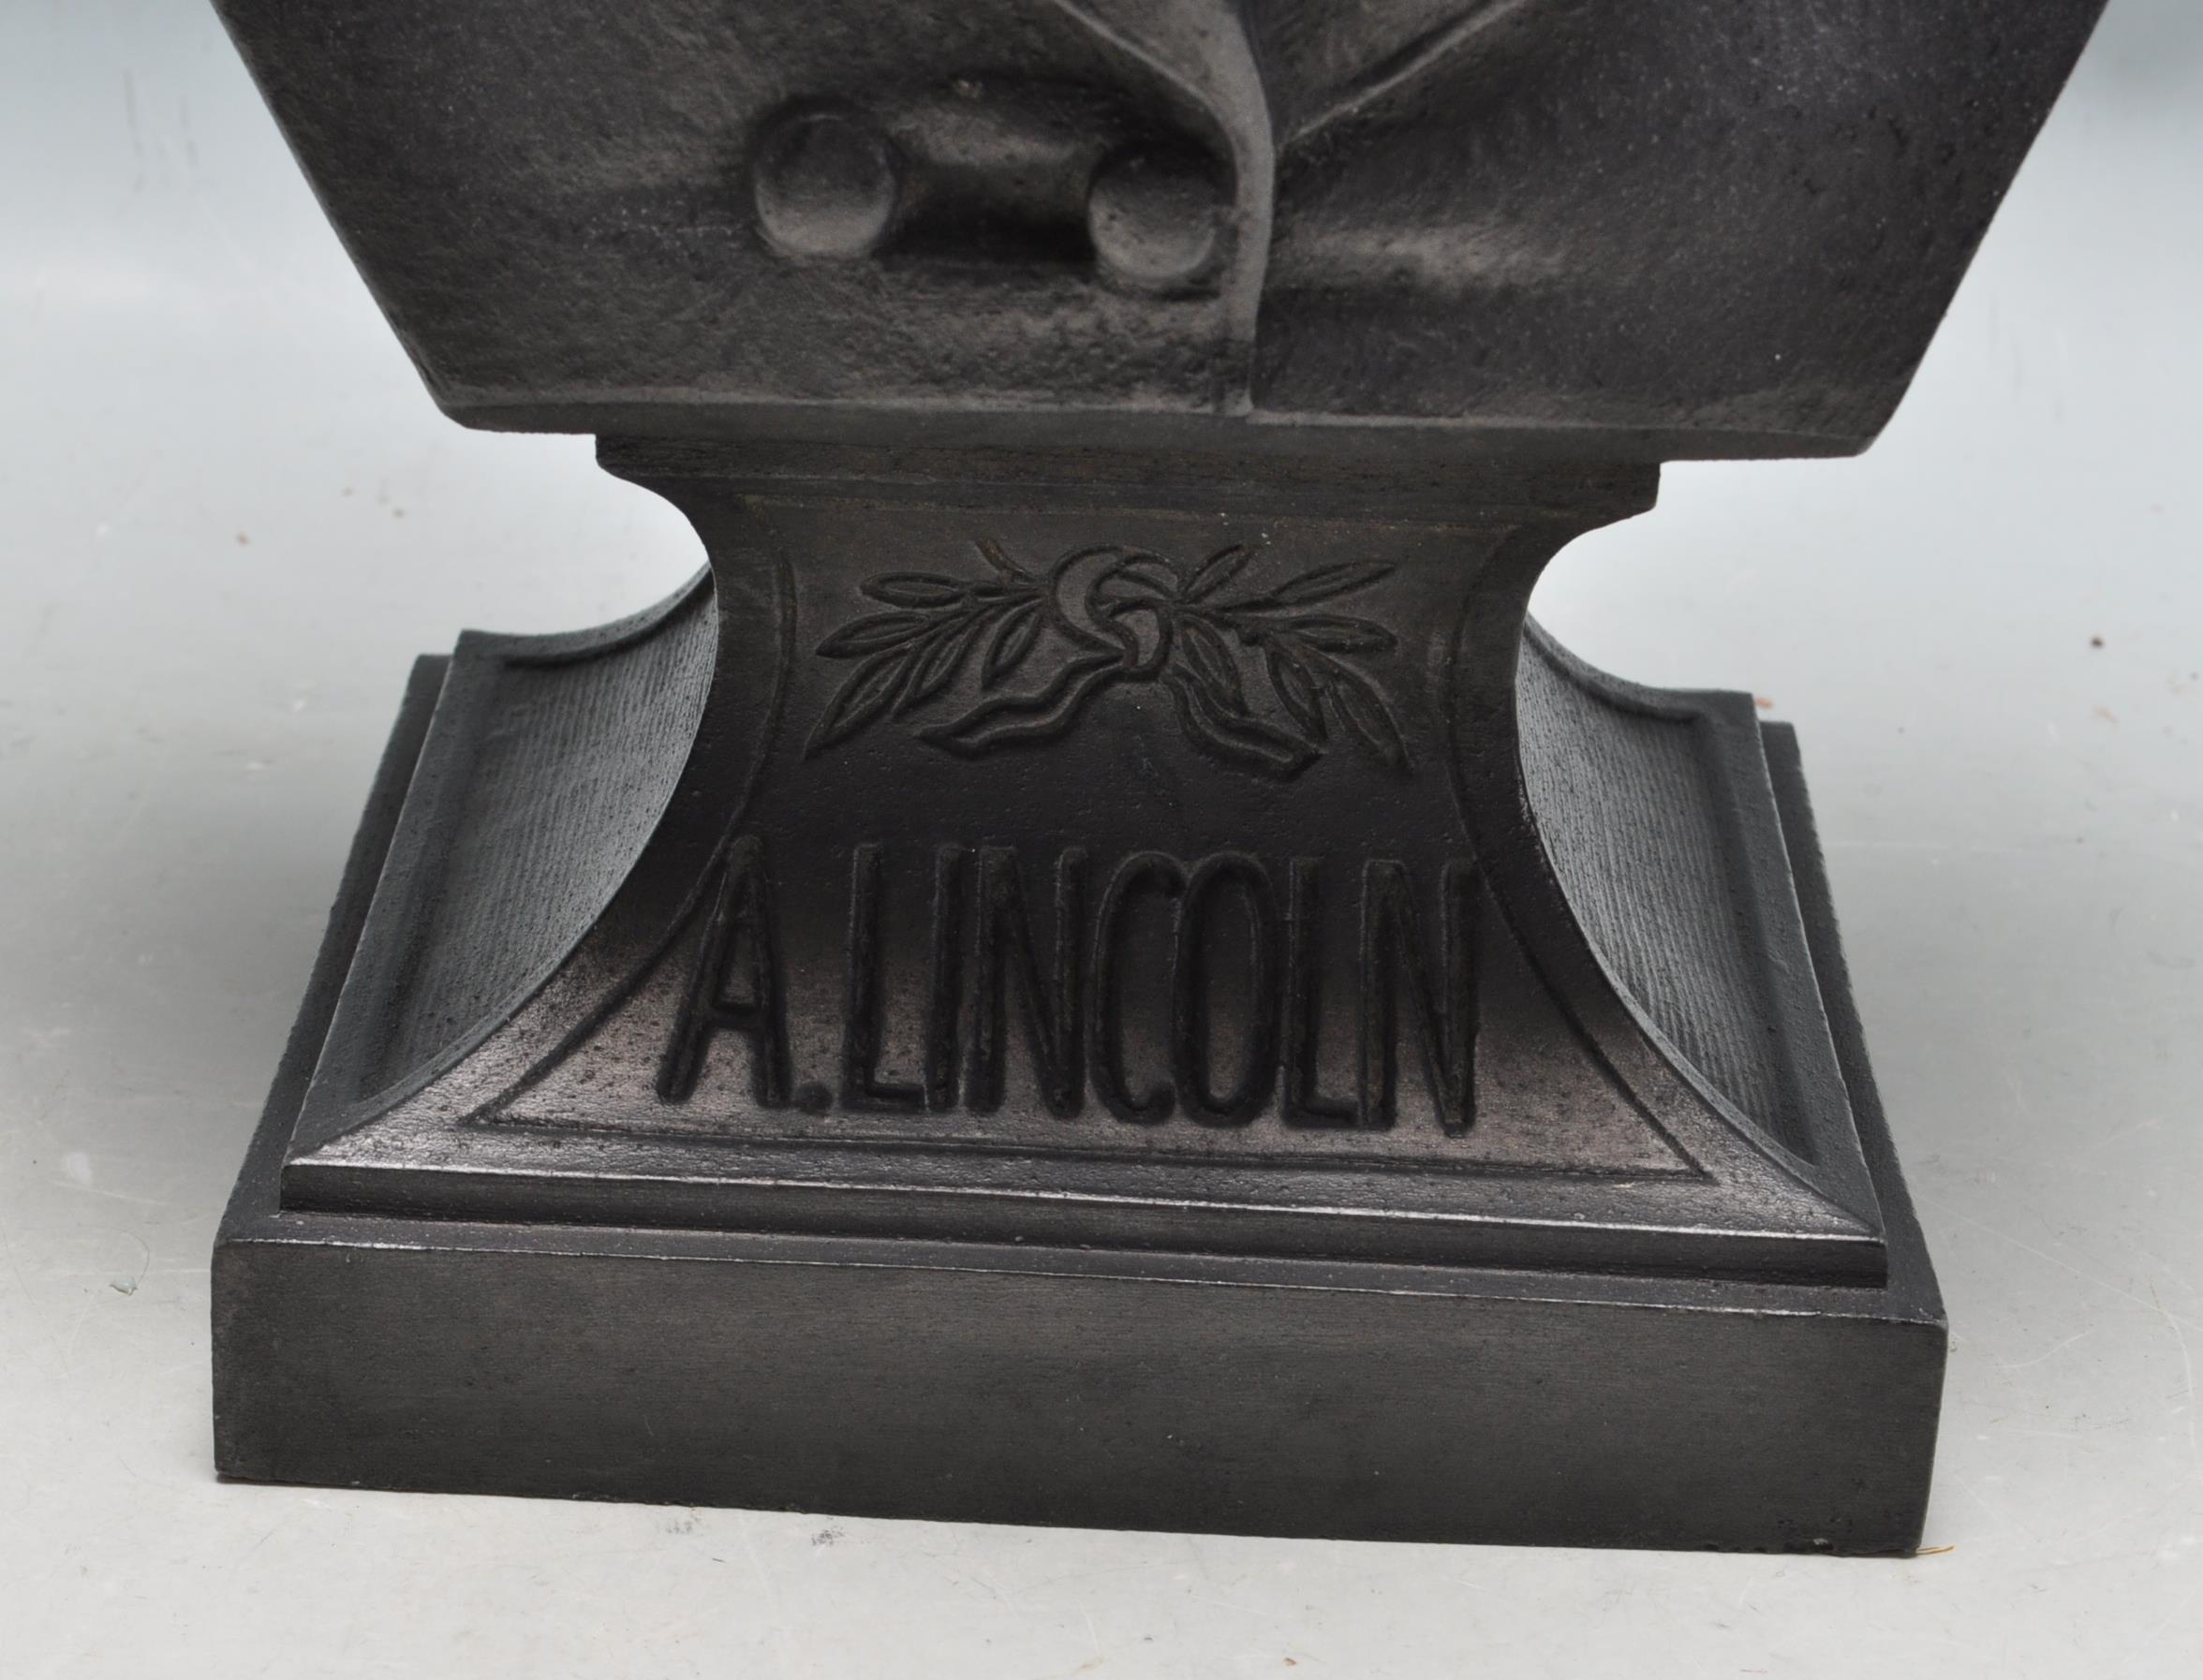 LATE 20TH CENTURY CAST METAL BUST OF ABRAHAM LINCOLN - Image 4 of 7